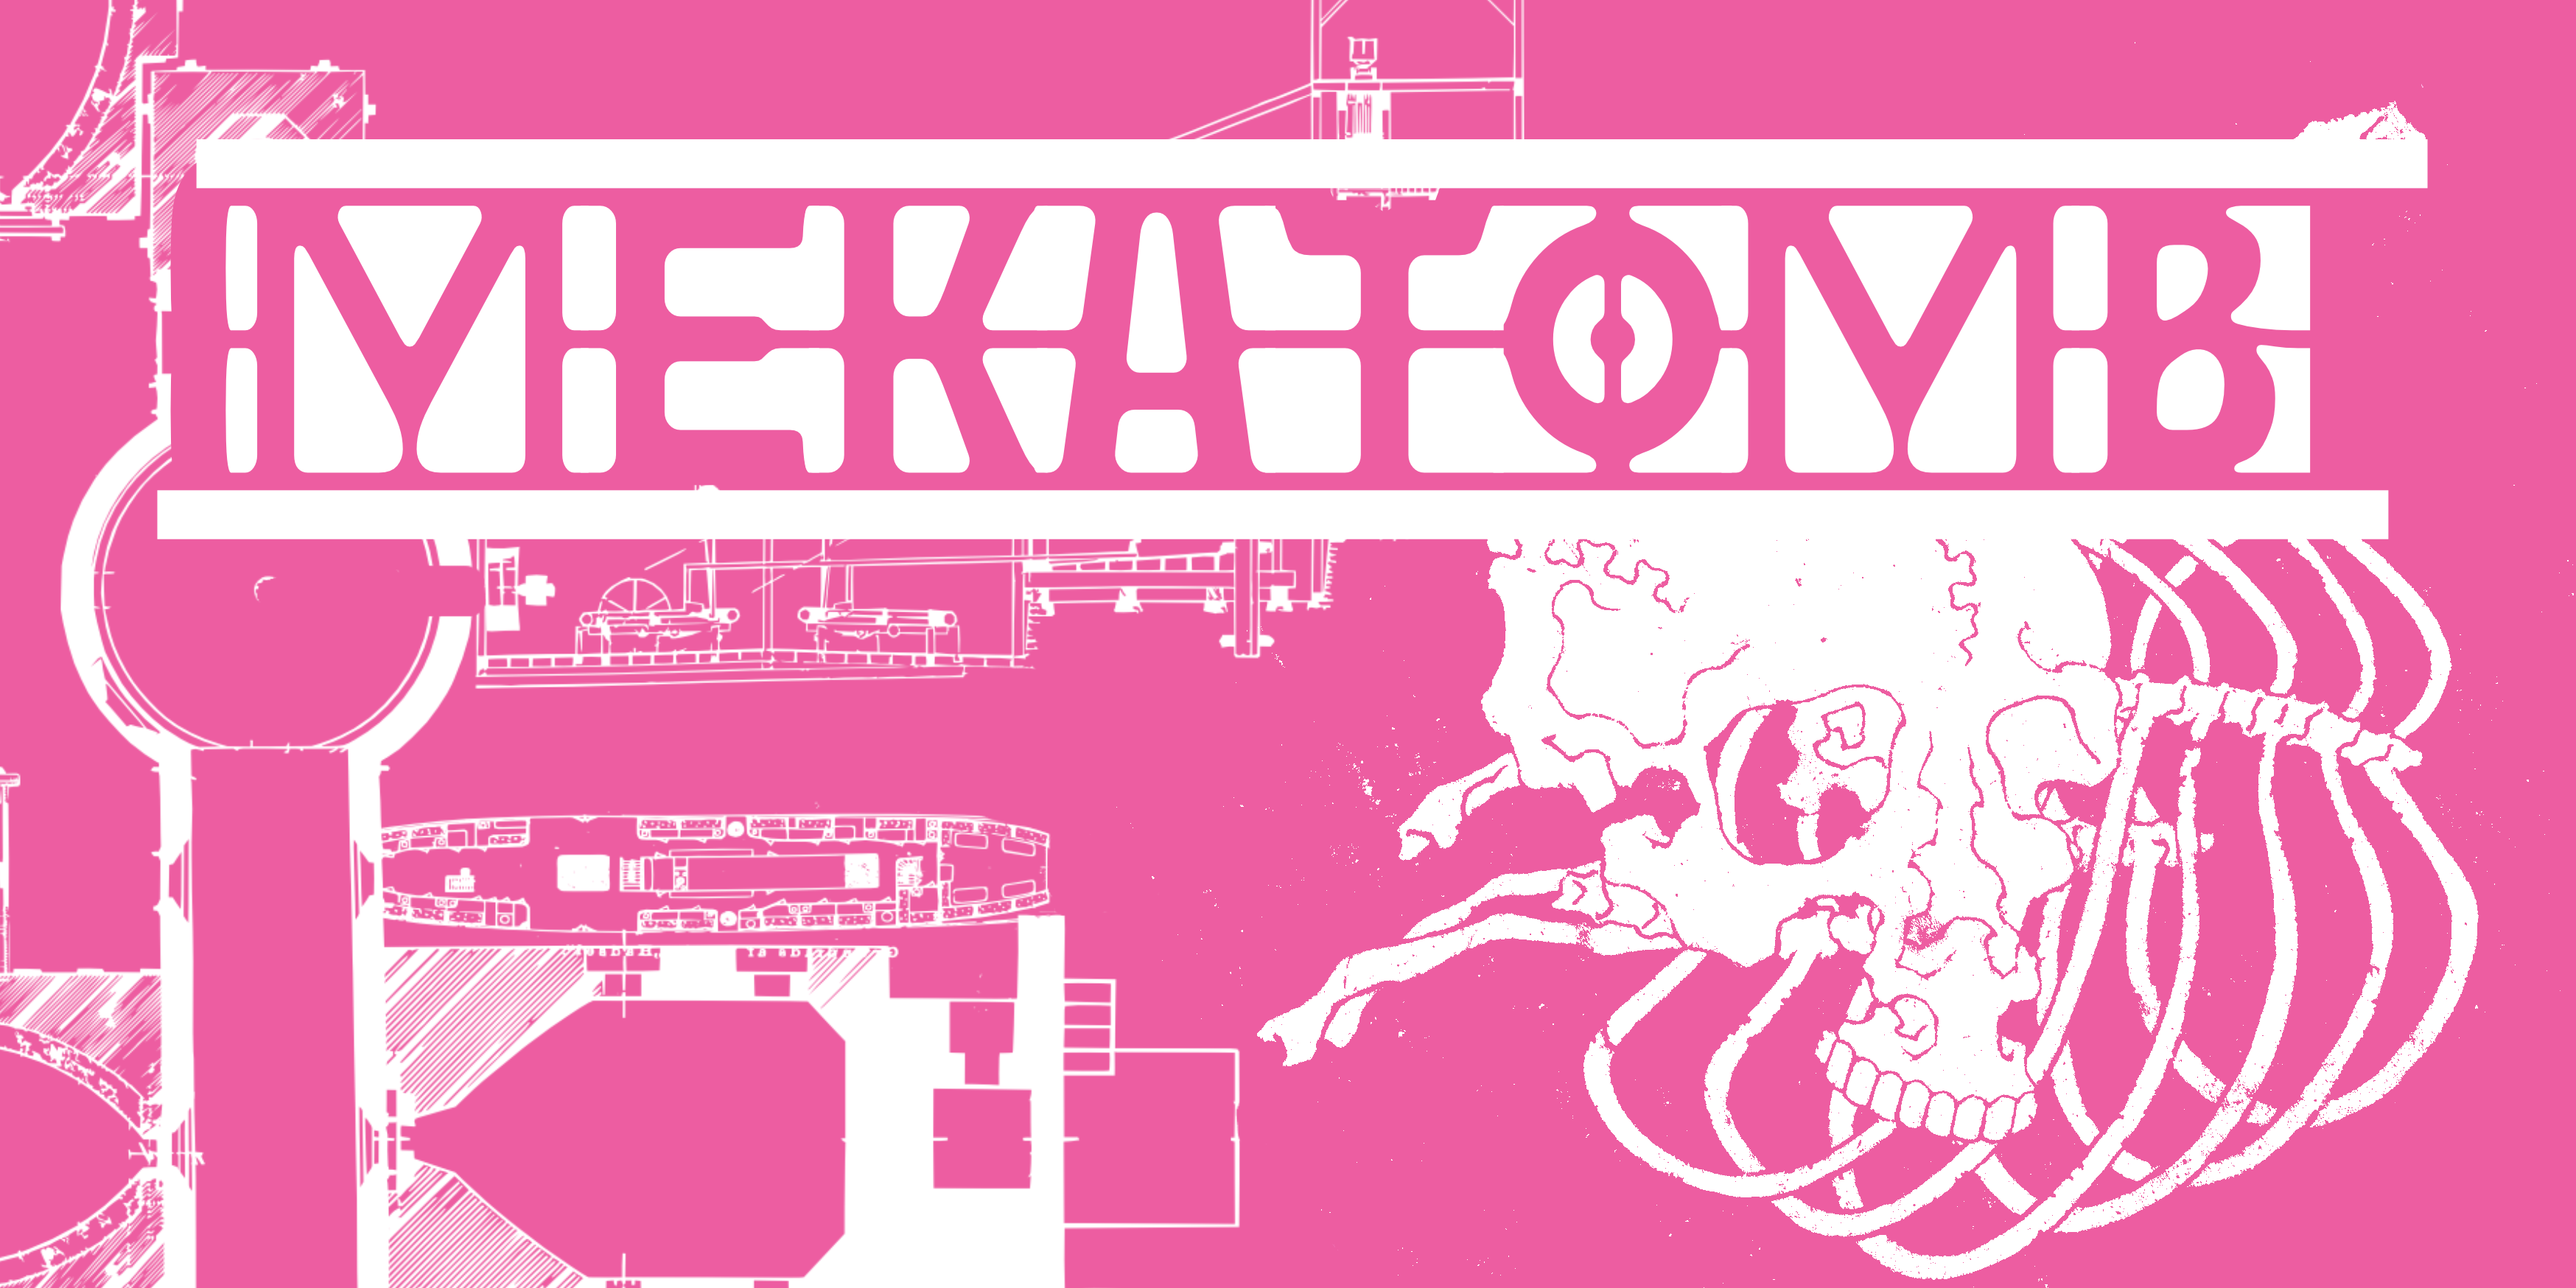 MEKATOMB - a dungeon for bastards.